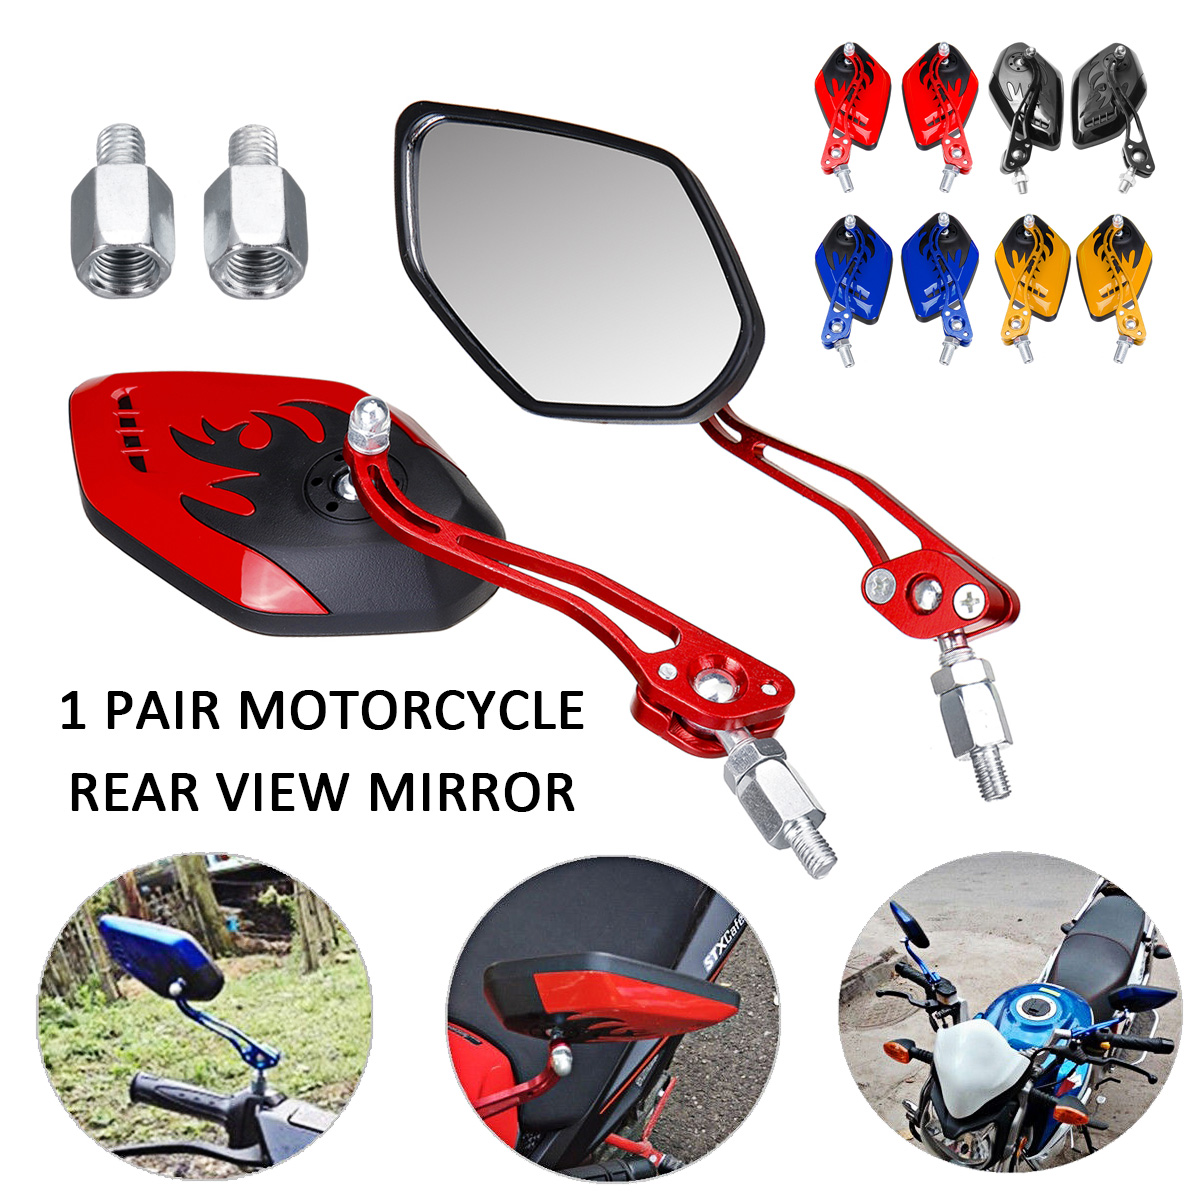 Rear View Mirrors Yellow 1 Pair of 8mm 10mm Universal Aluminum Alloy Hard Plastic Motorcycle Scooter Aluminum Flame Pattern Side Rear View Mirrors 